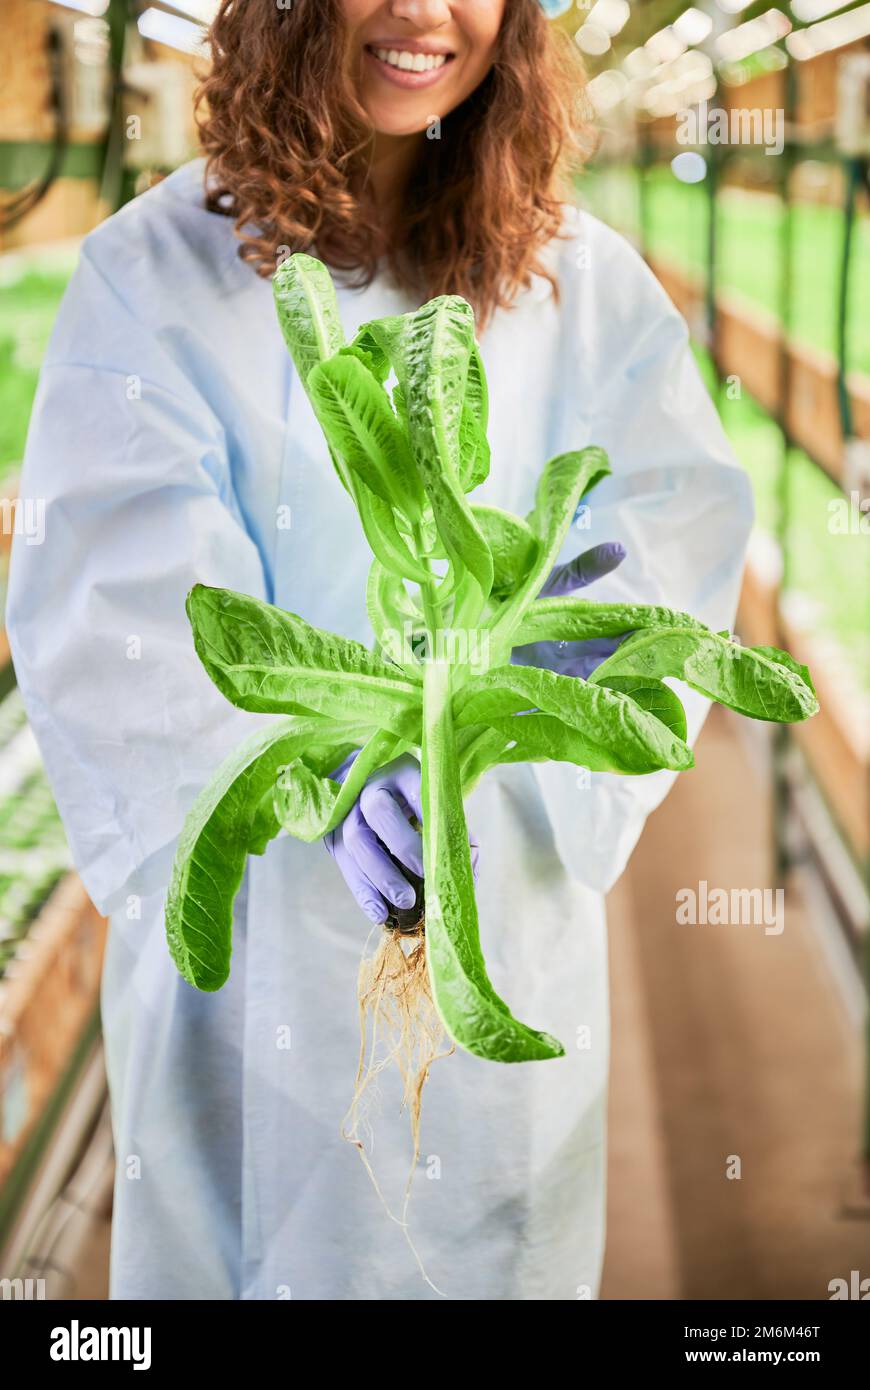 Cropped view of woman with green arugula plant in hands standing in greenhouse. Close up of female gardener hands in garden rubber gloves holding leafy green plant on blurred background. Stock Photo